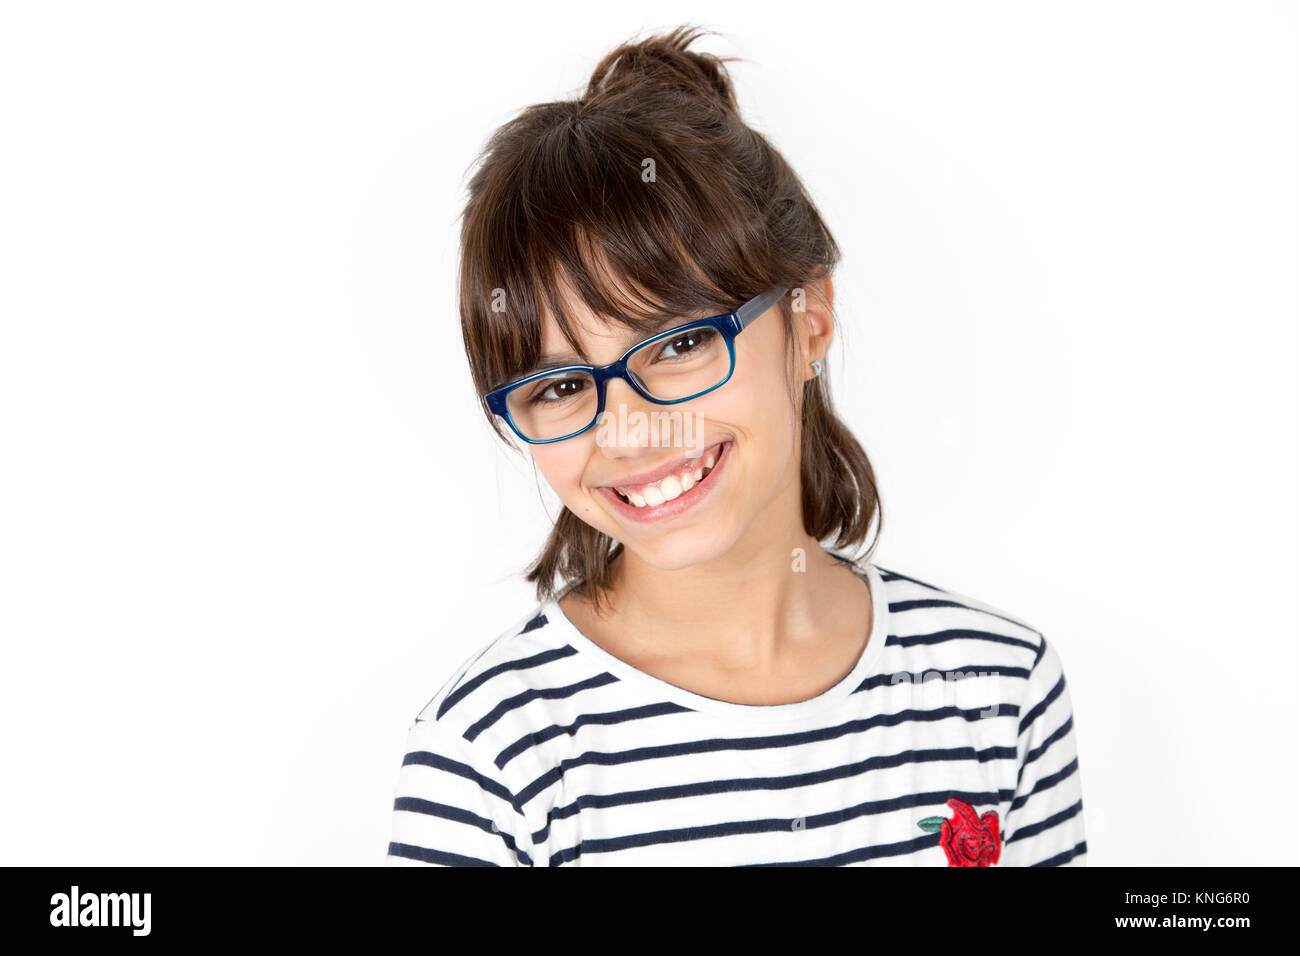 385 Girl Nerd Hairstyles Stock Photos High Res Pictures and Images   Getty Images